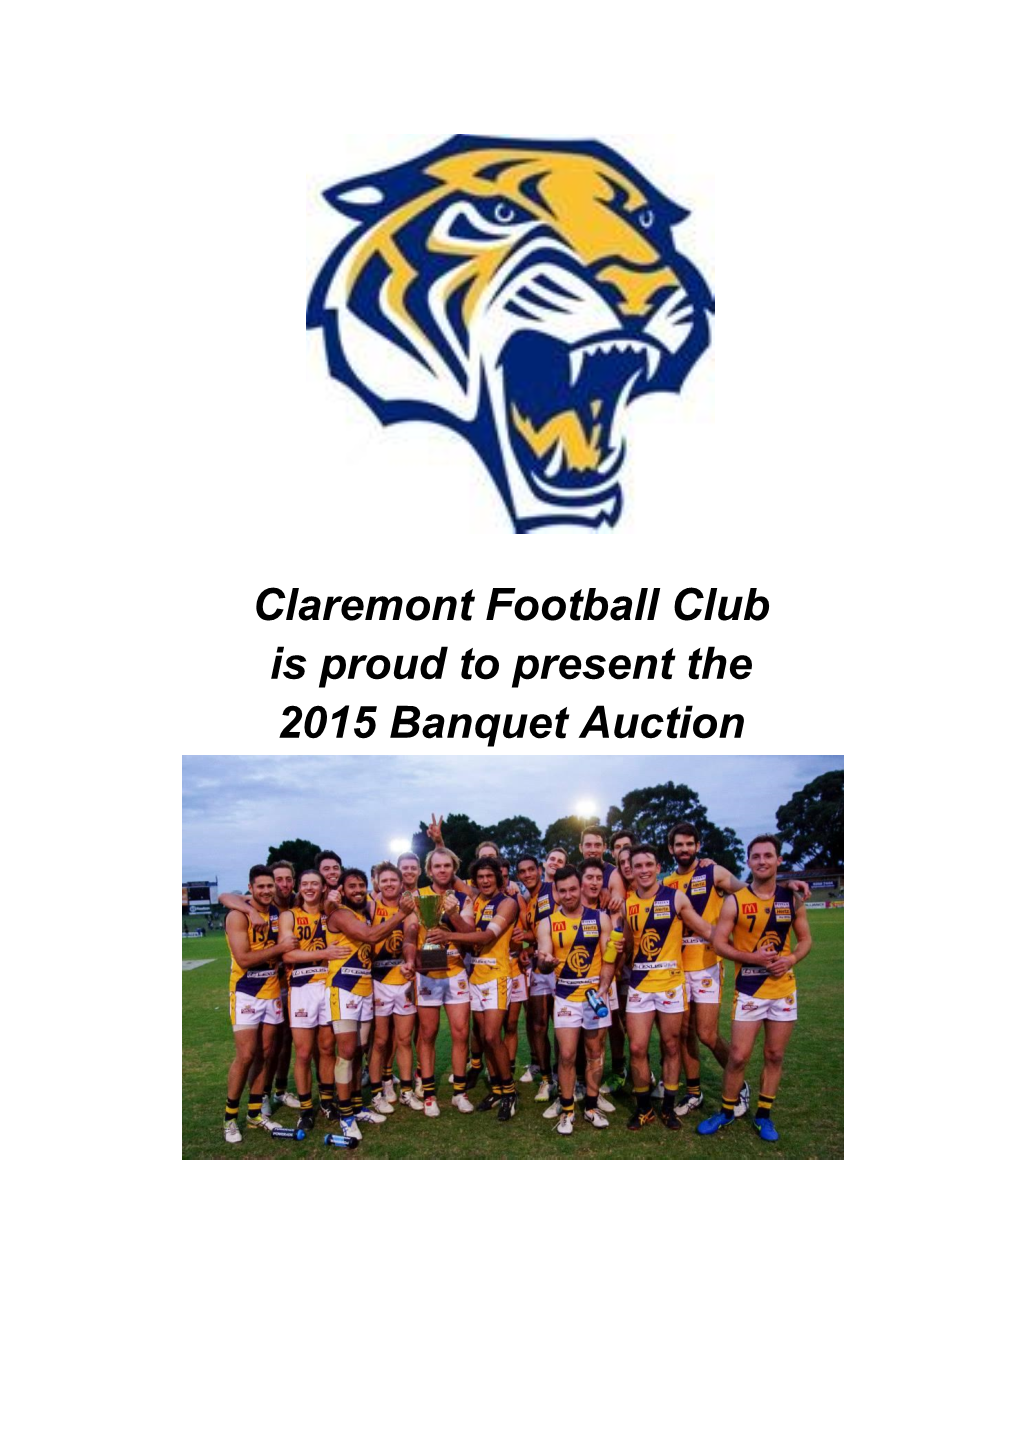 Claremont Football Club Is Proud to Present the 2015 Banquet Auction